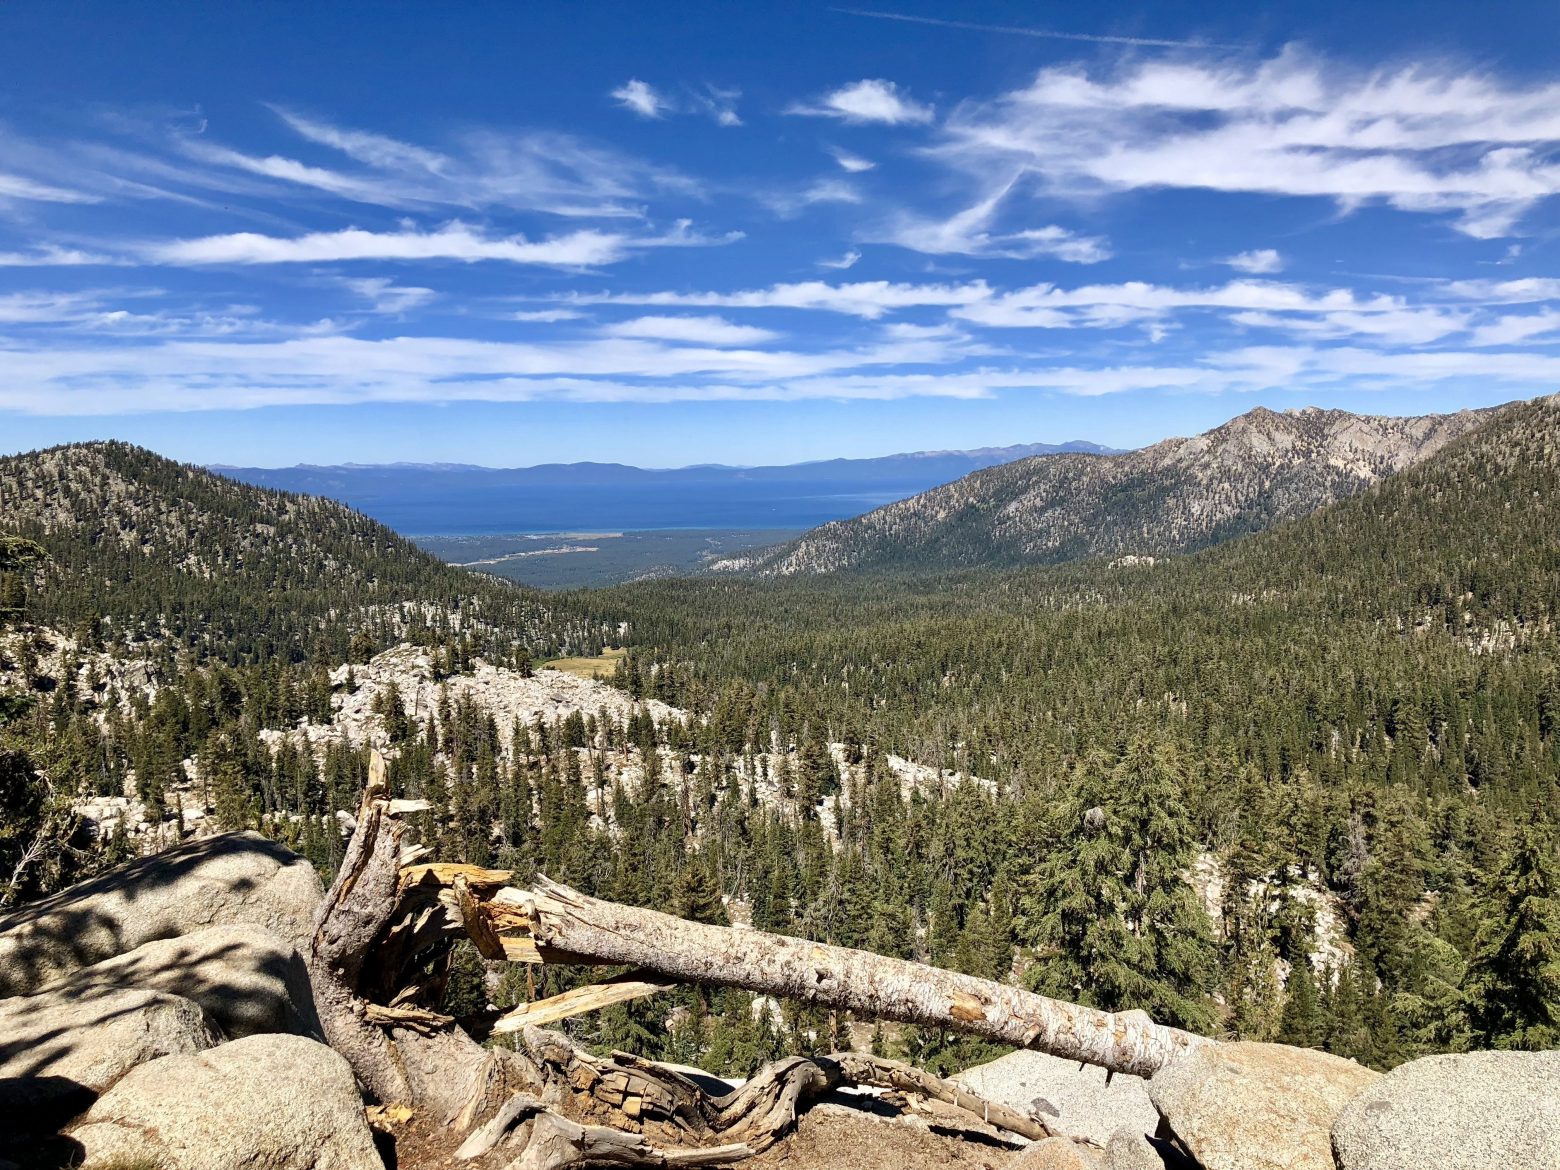 Lake Tahoe from above Freel Meadows